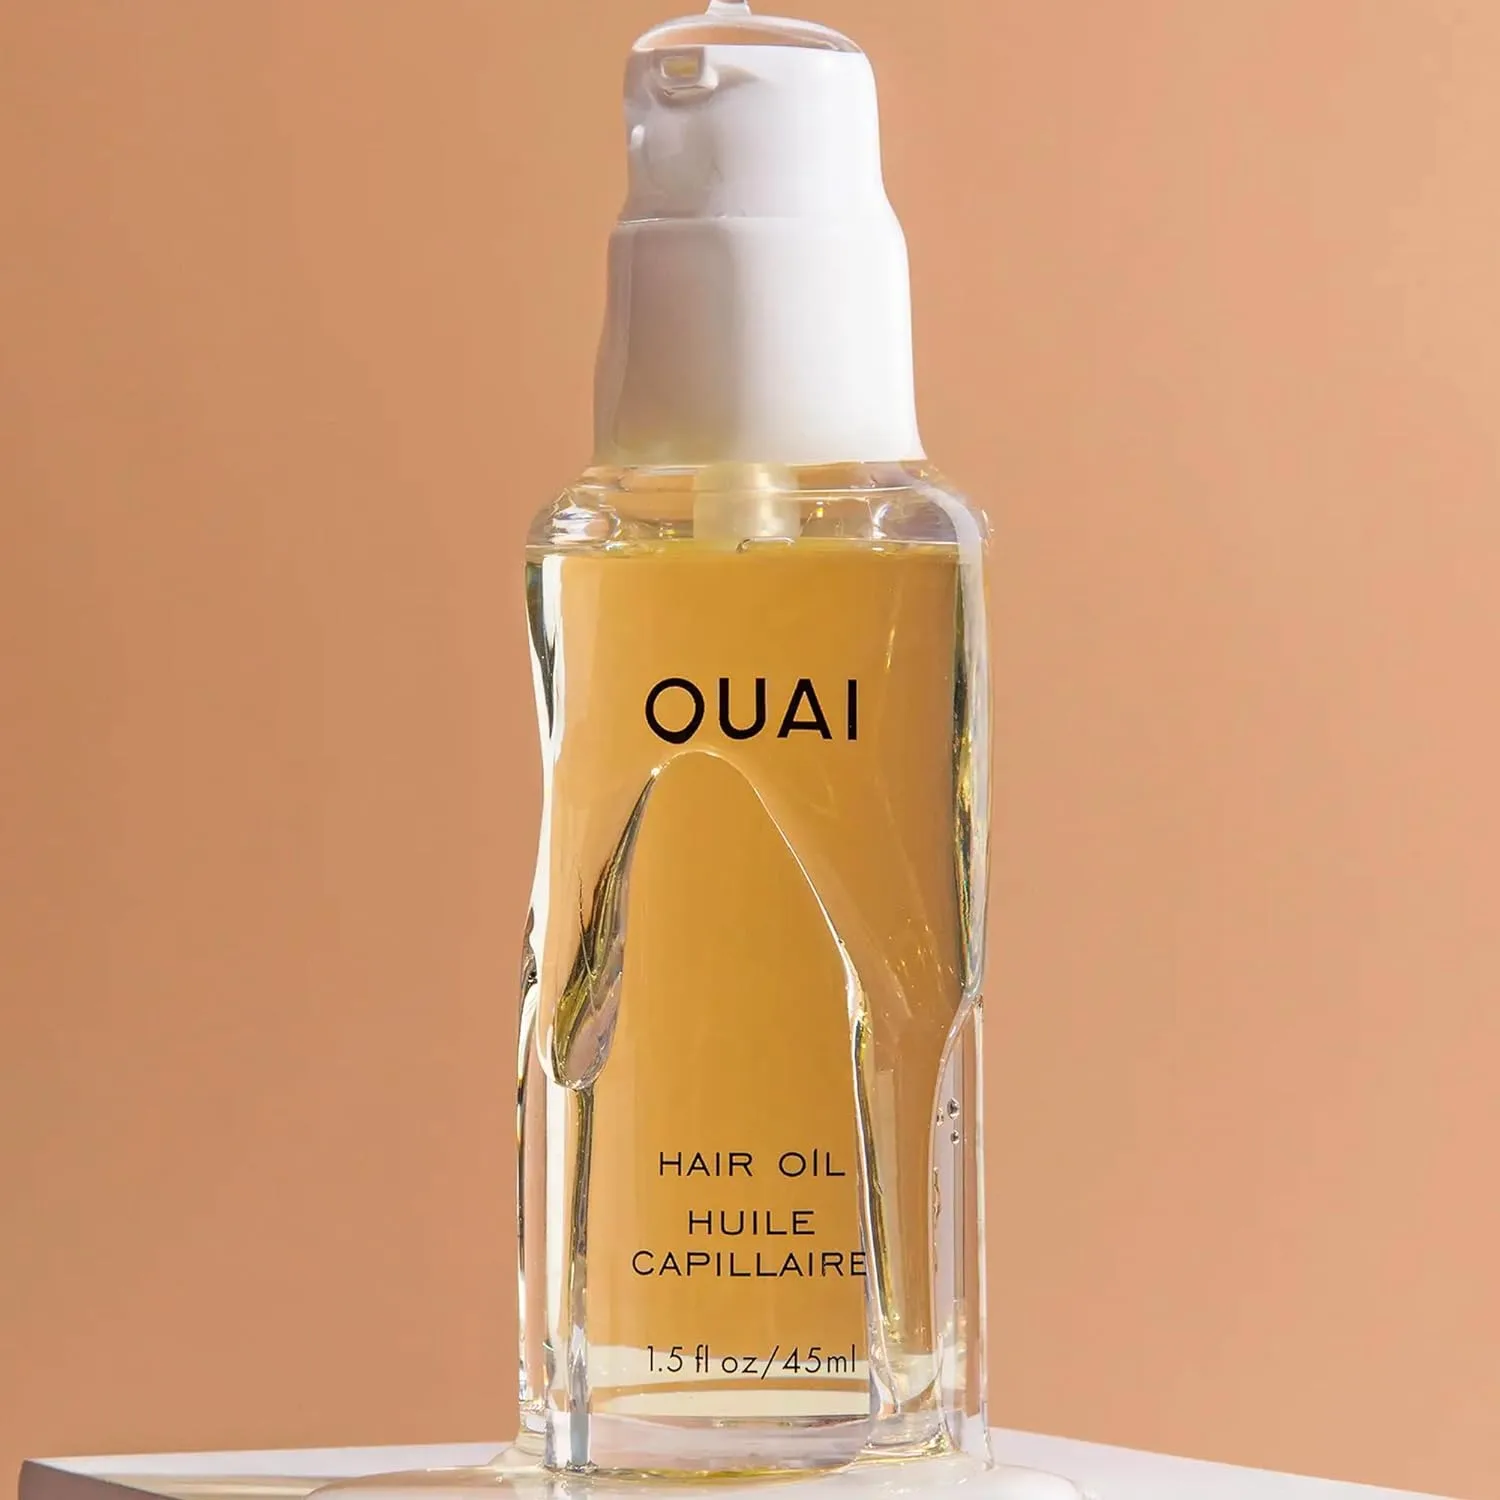 OUAI Hair Oil - Protects from UV/Heat Damage and Frizz, Adds Mega Shine & Smooths Split Ends